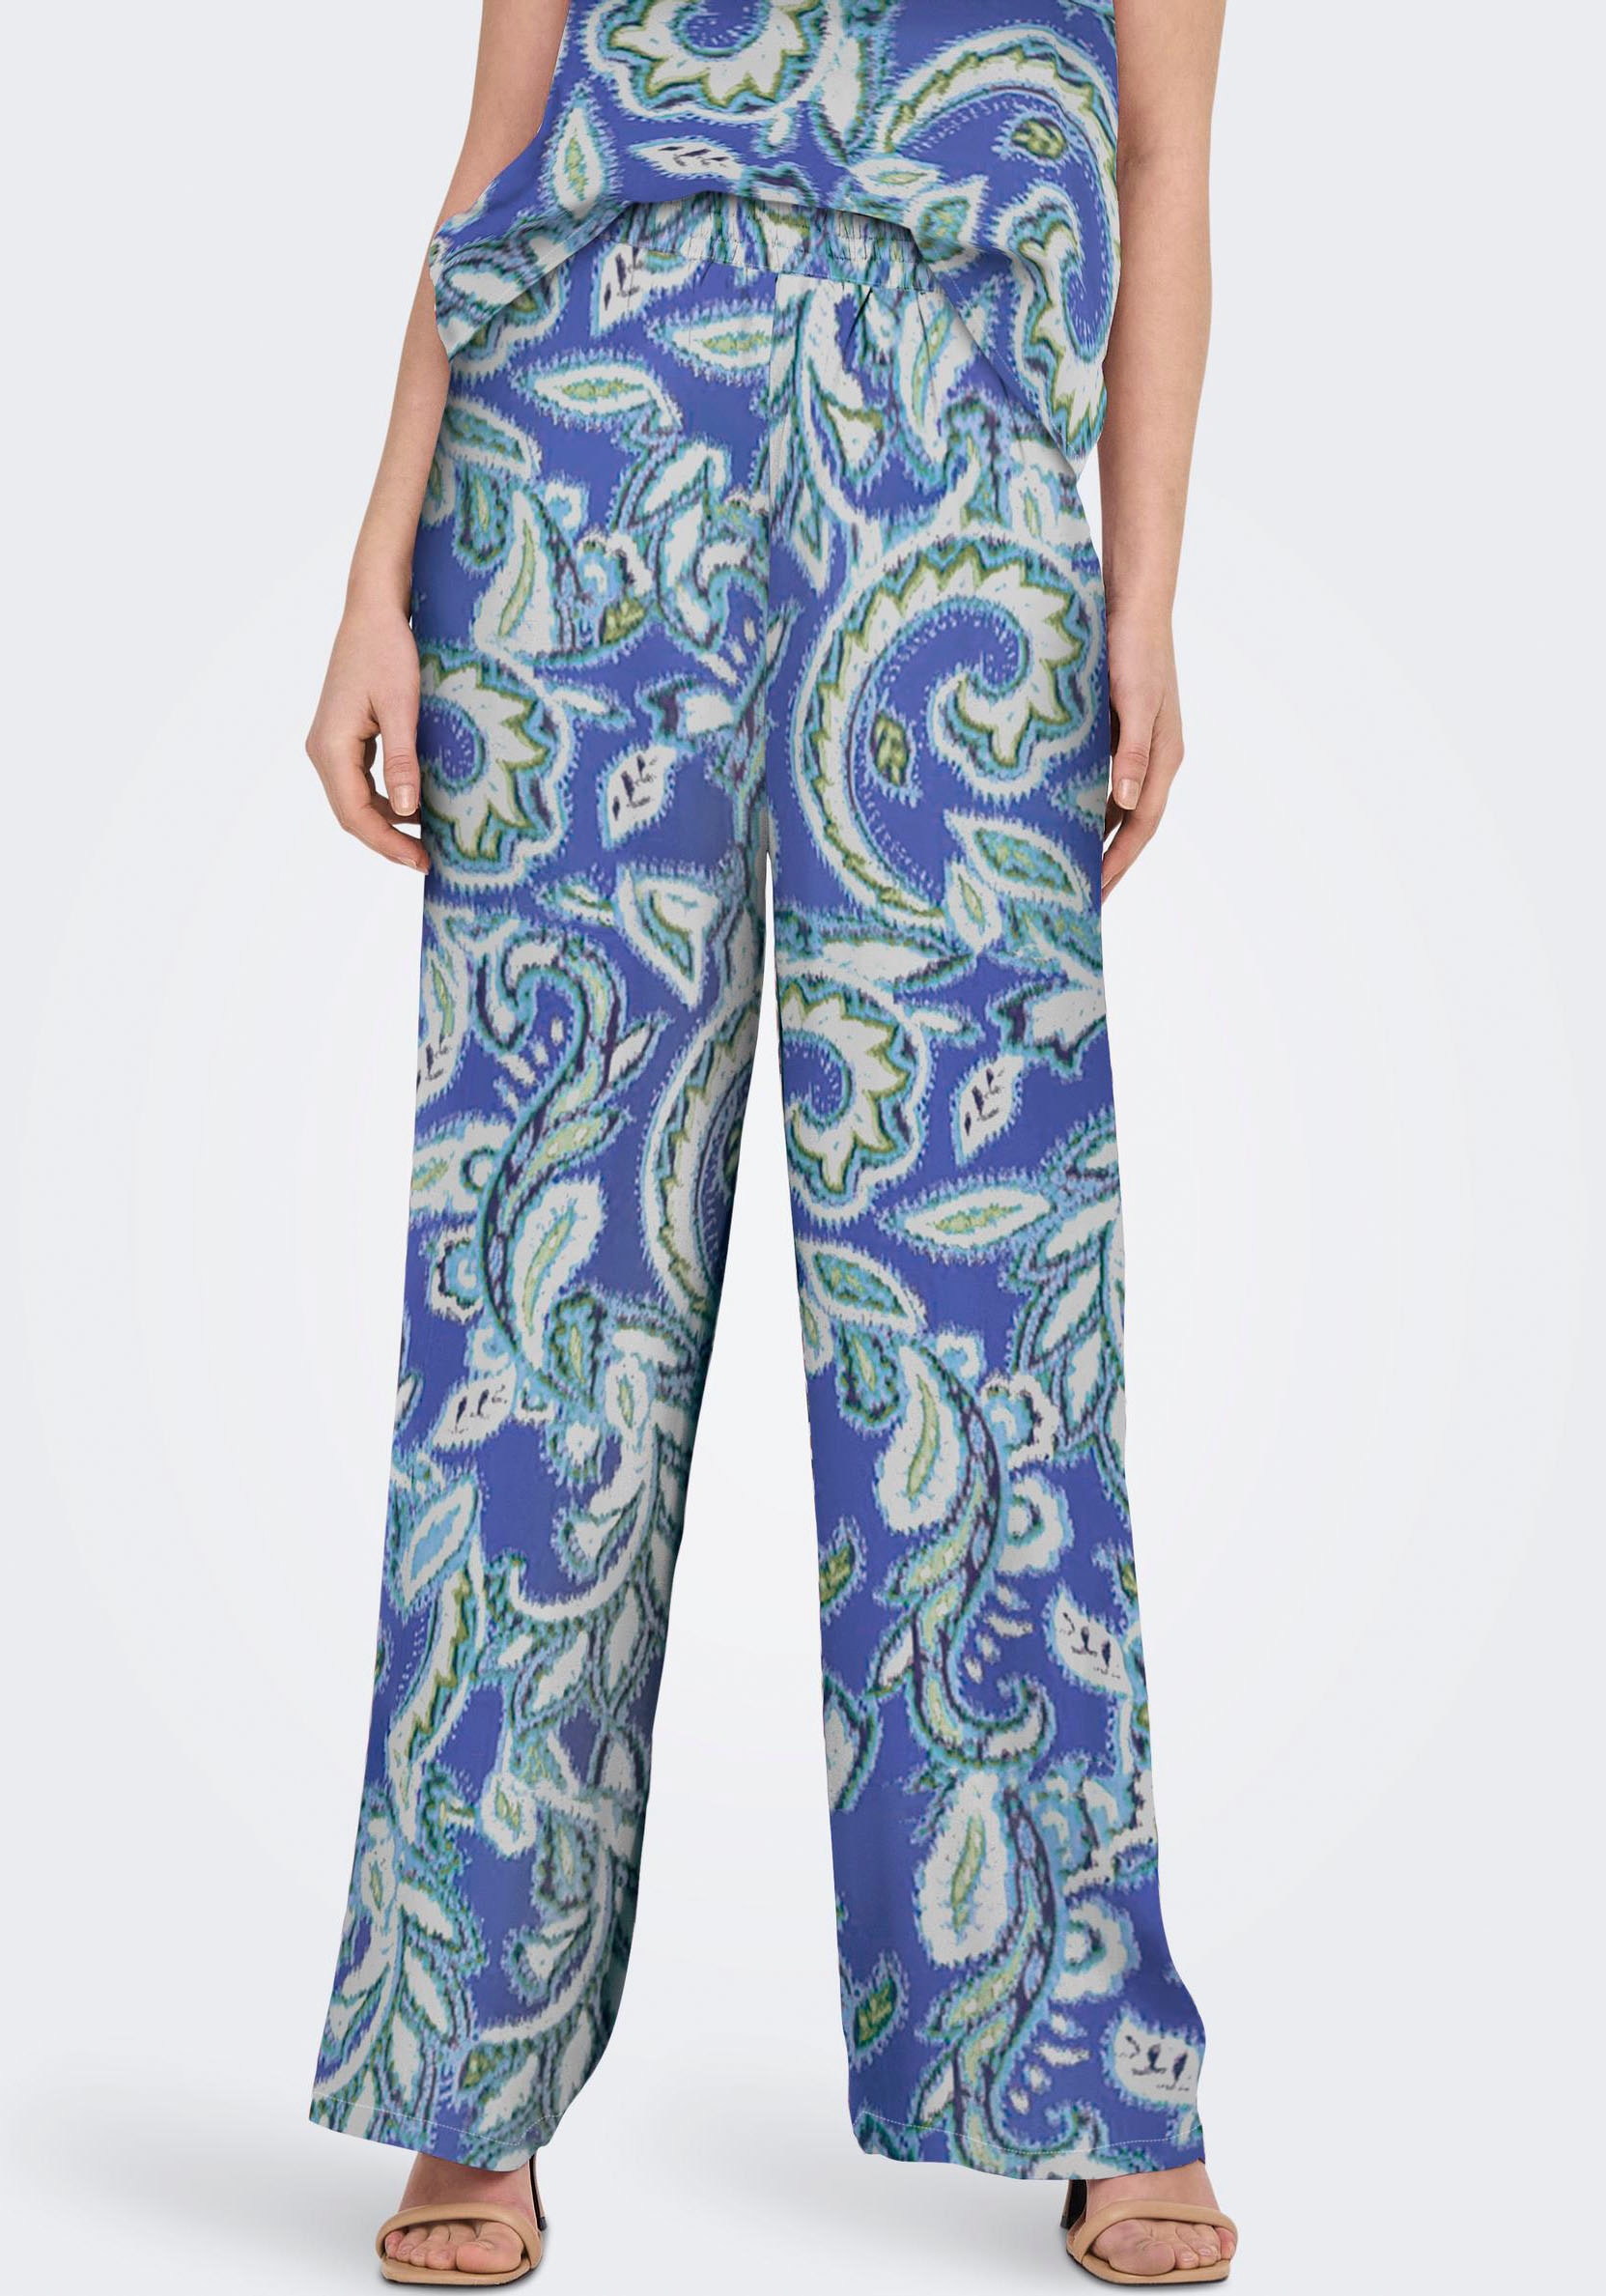 »ONLALMA Palazzohose PANT VIS bei AOP OTTO PALAZZO PTM« LIFE ONLY